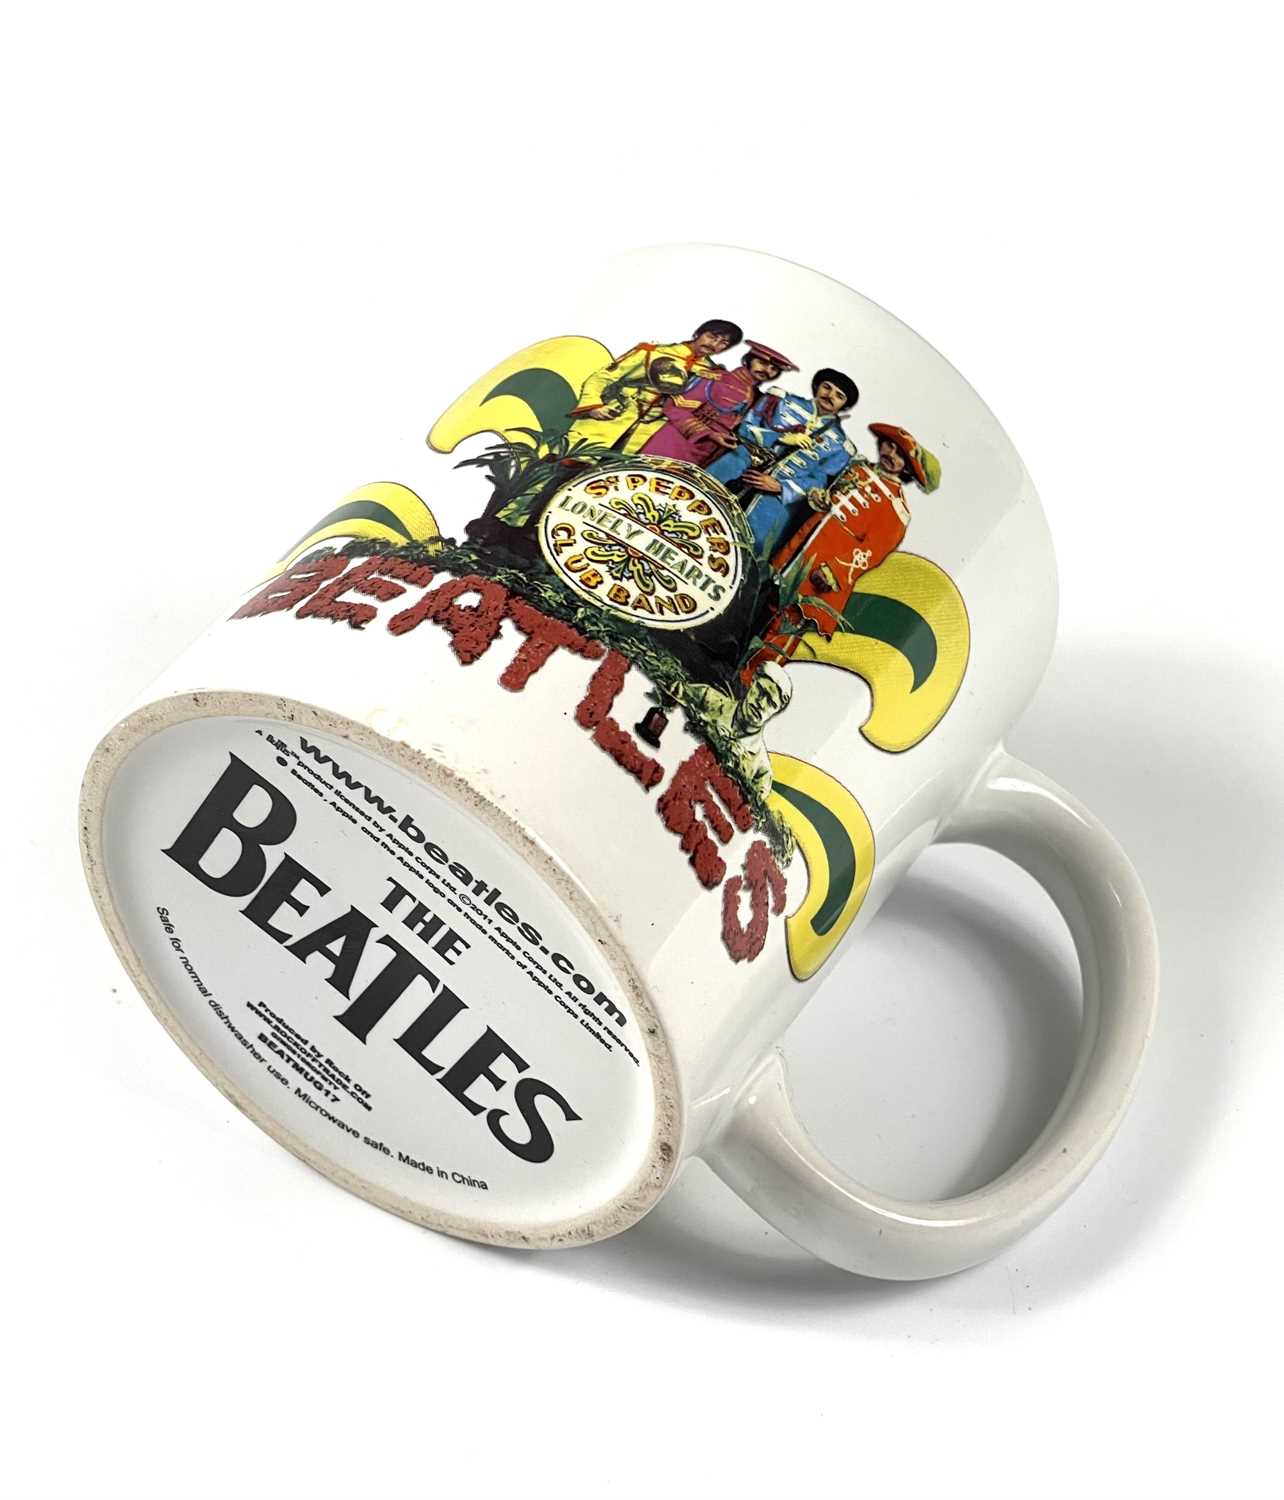 THE BEATLES and others. - Image 5 of 8